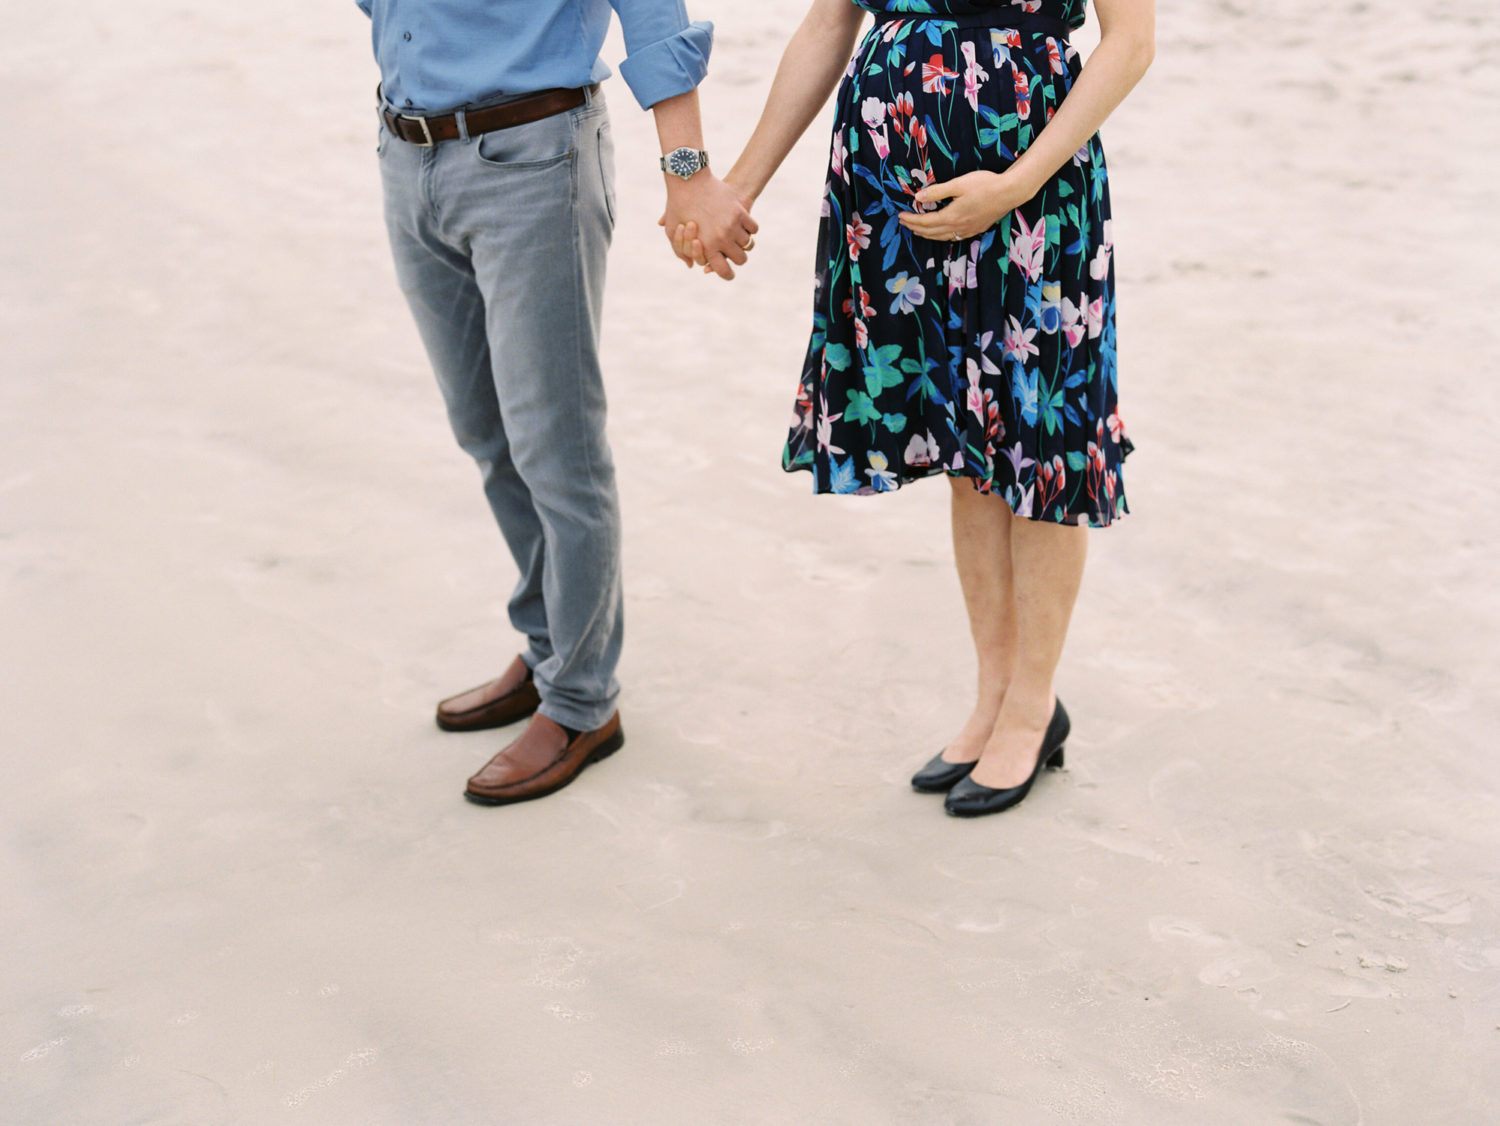 Close up of torso and legs of a man and pregnant woman holding hands and standing together on a sandy beach